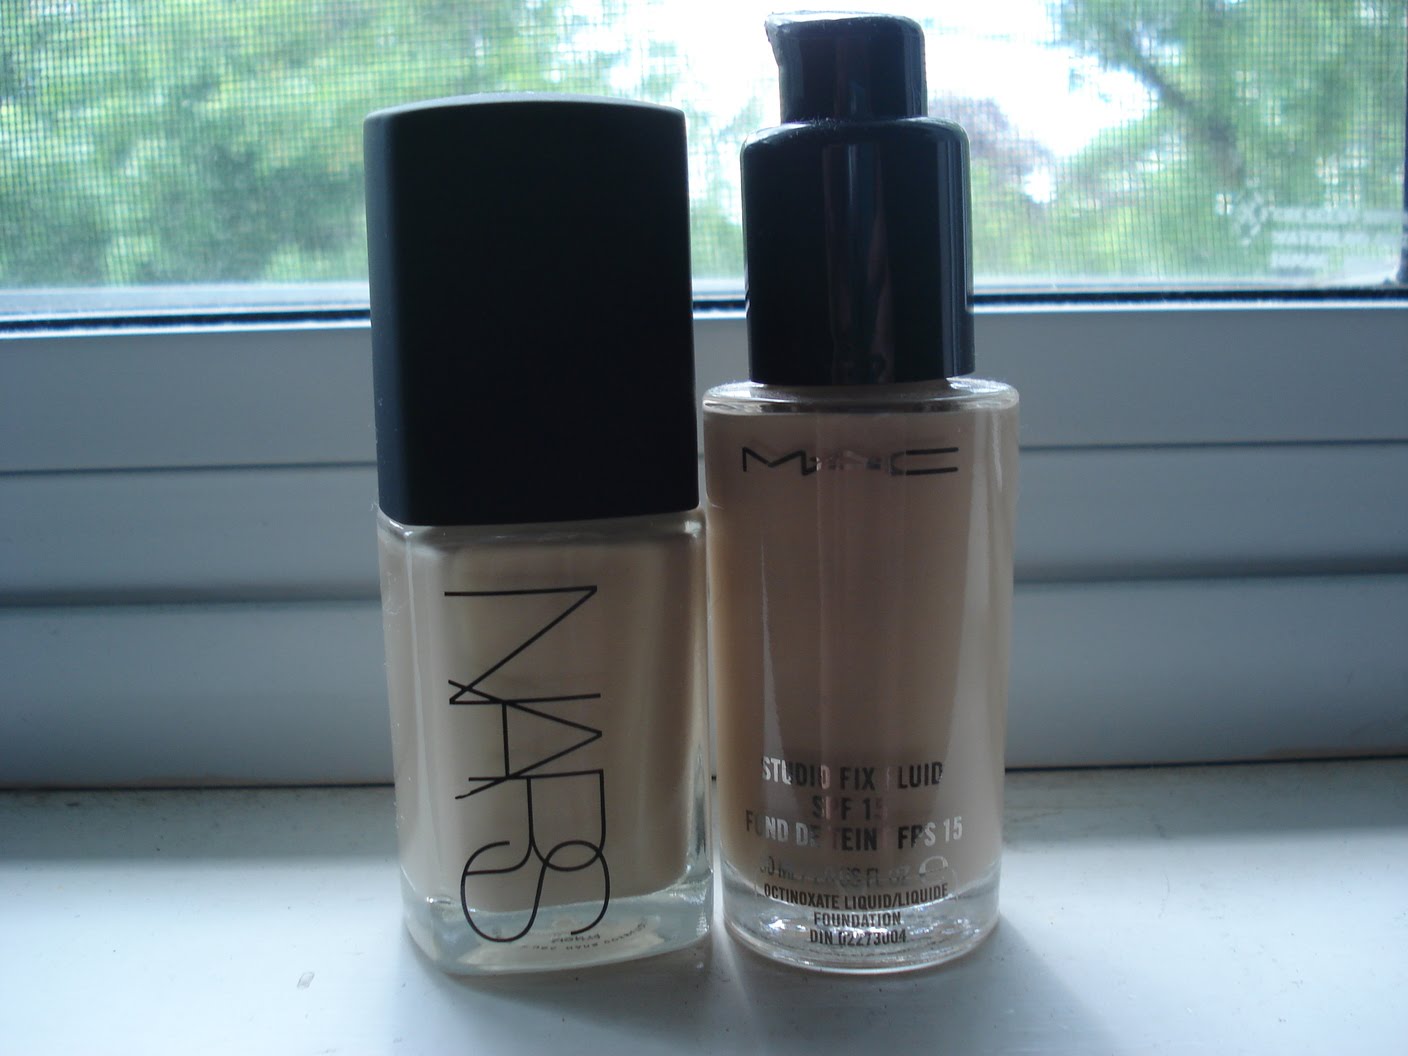 nars sheer glow review for oily skin